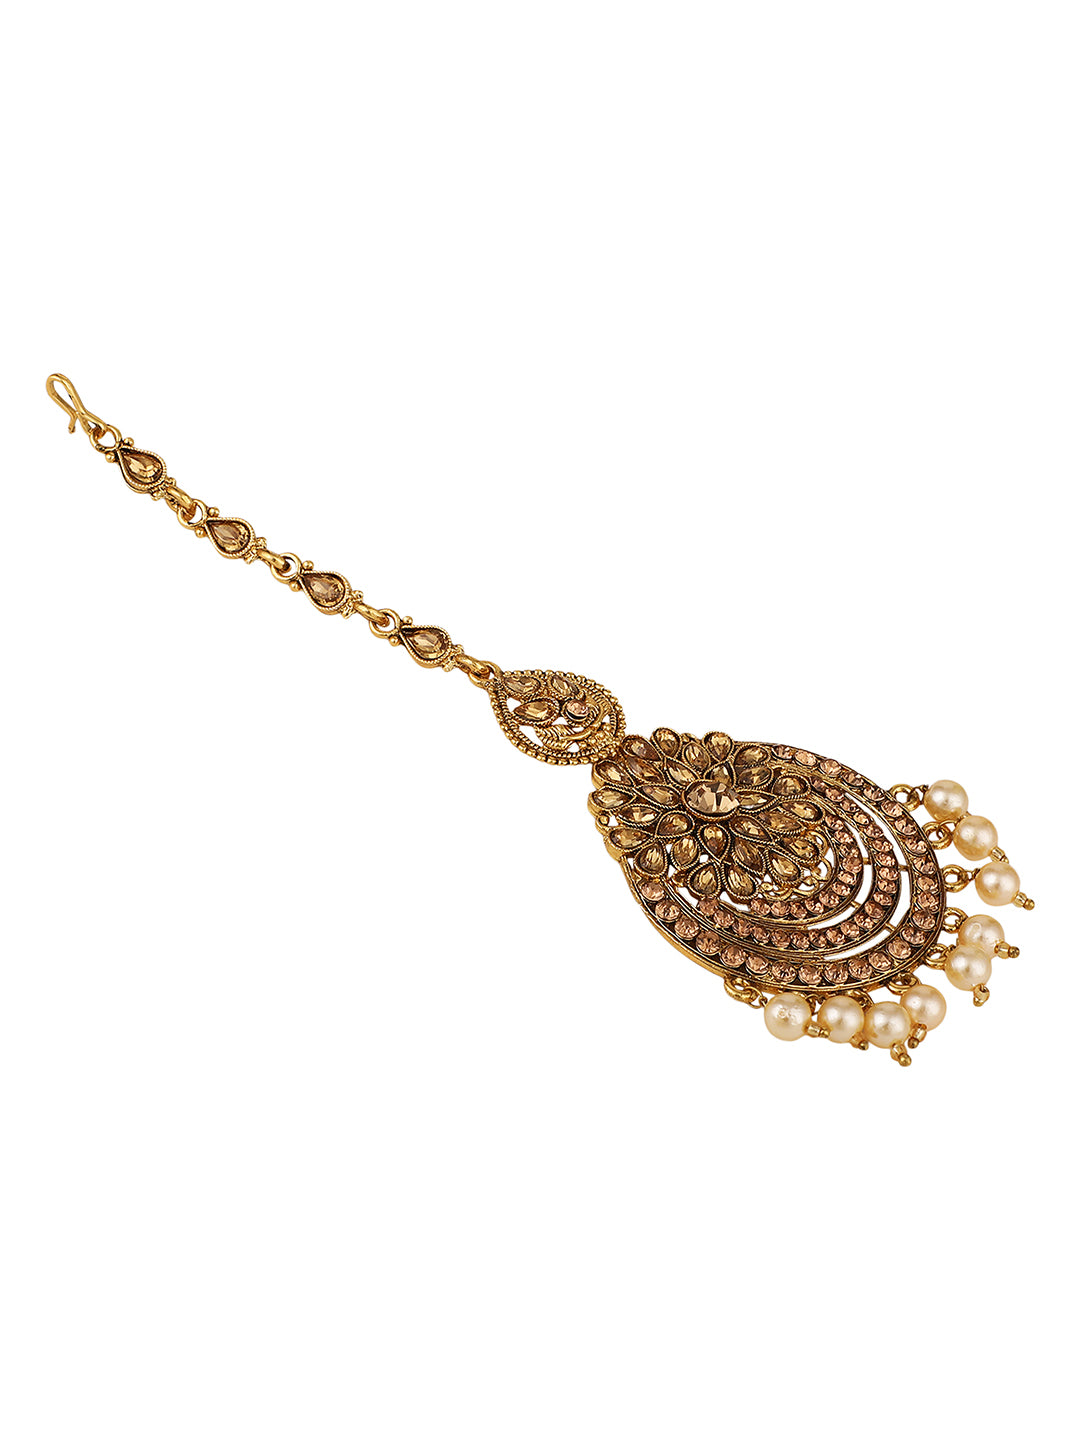 Women's/Girls Ethnic Gold Plated Stone Studded With Pearl Drop Floral Shaped Maangtikka- Mode Mania